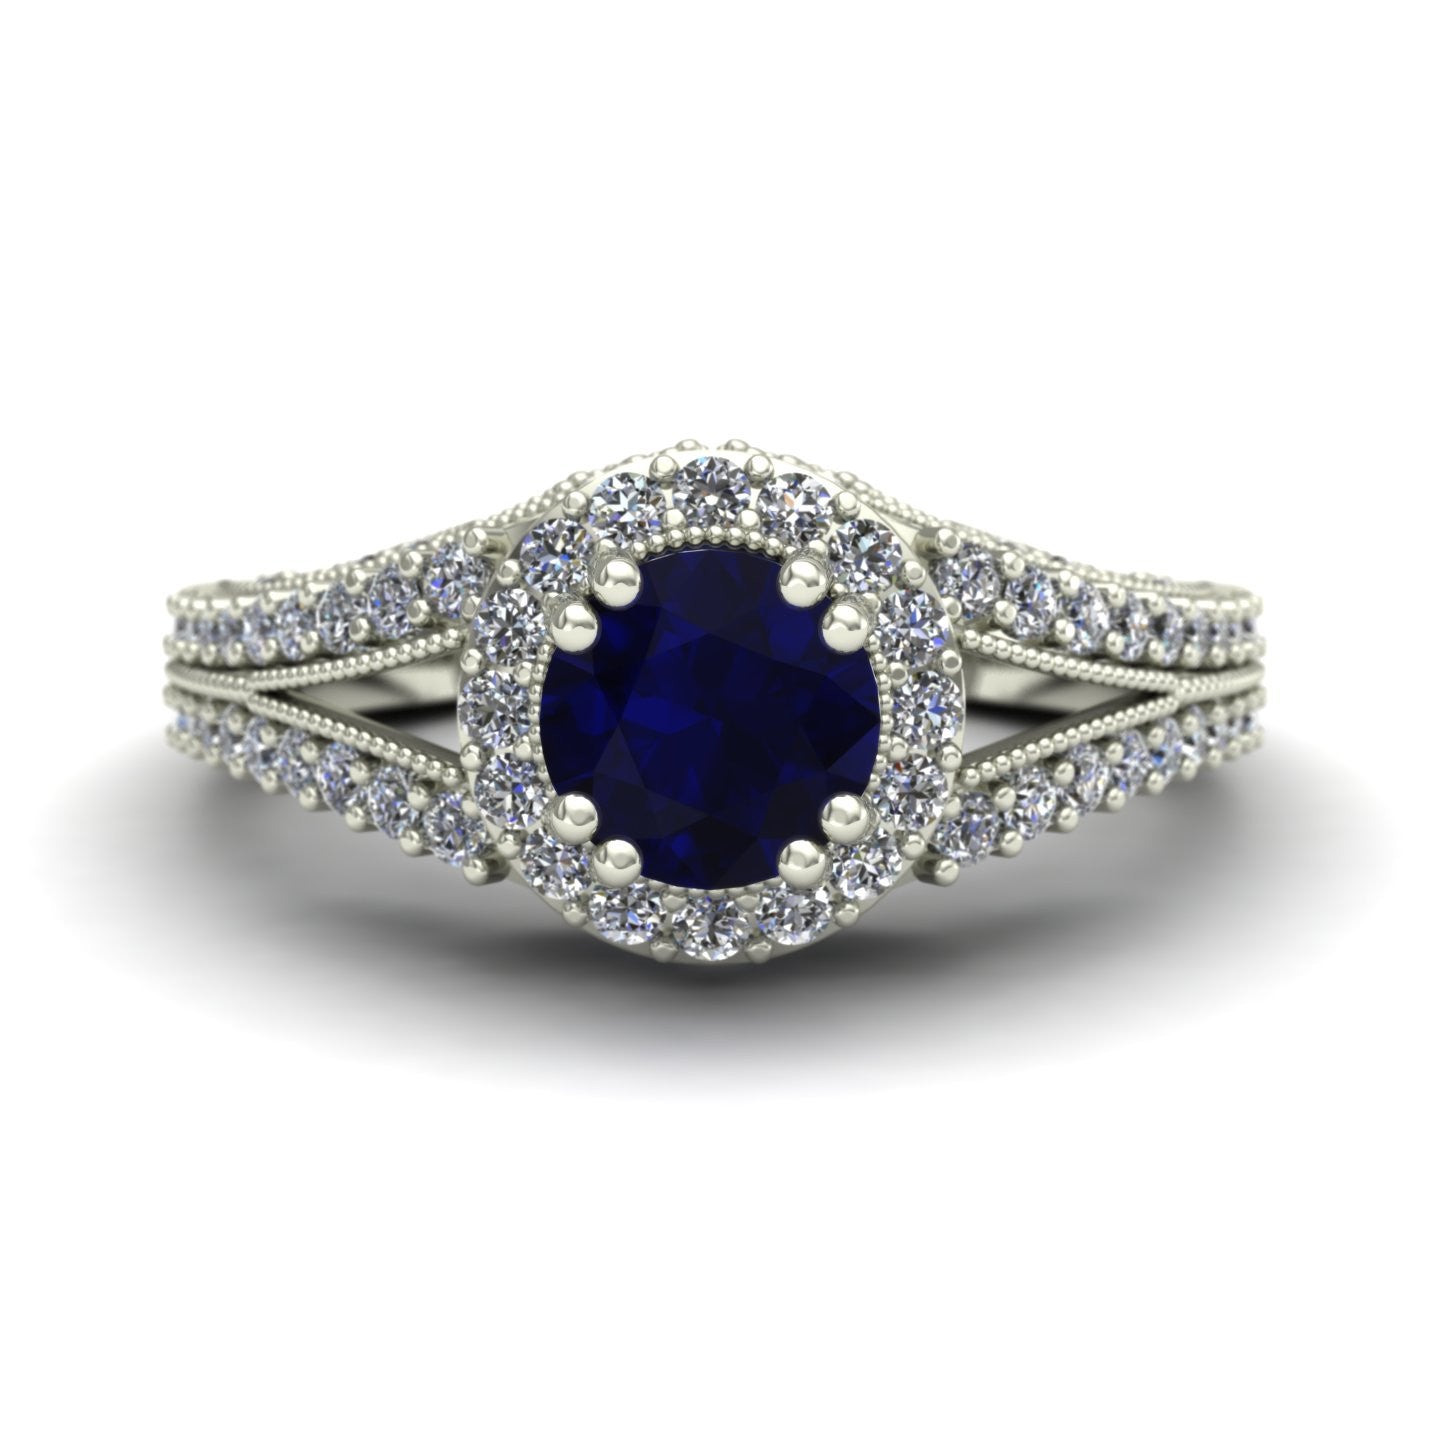 Blue sapphire and diamond scallop ring in 14k white gold - Charles Babb Designs - top view